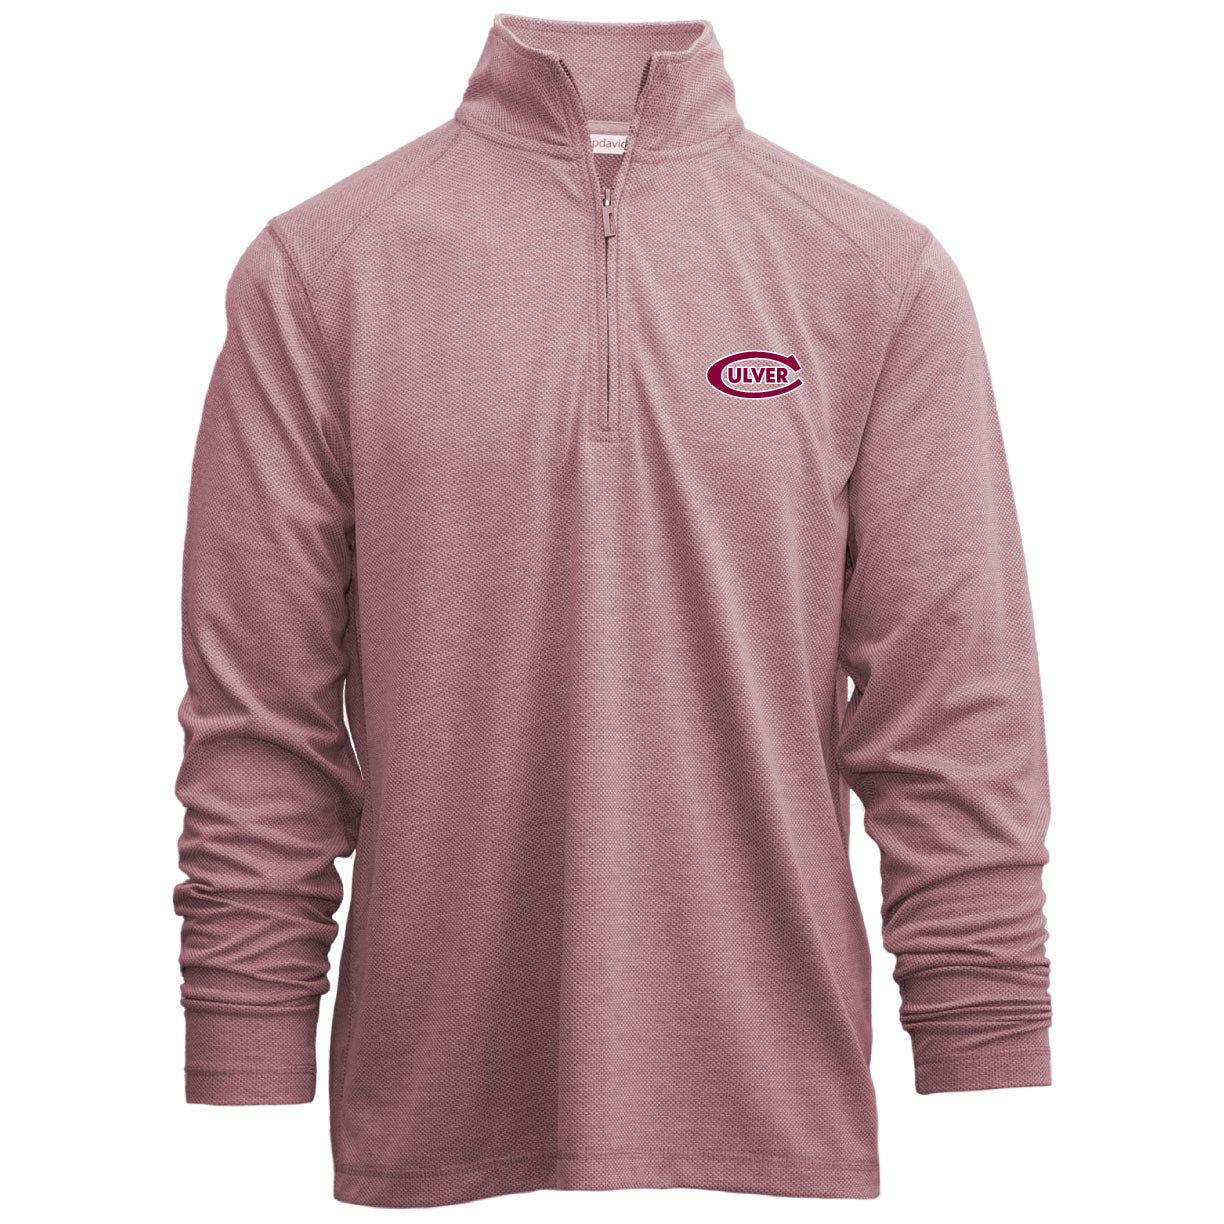 Culver-C Sterling 1/4 Zip Pullover - Mesquite